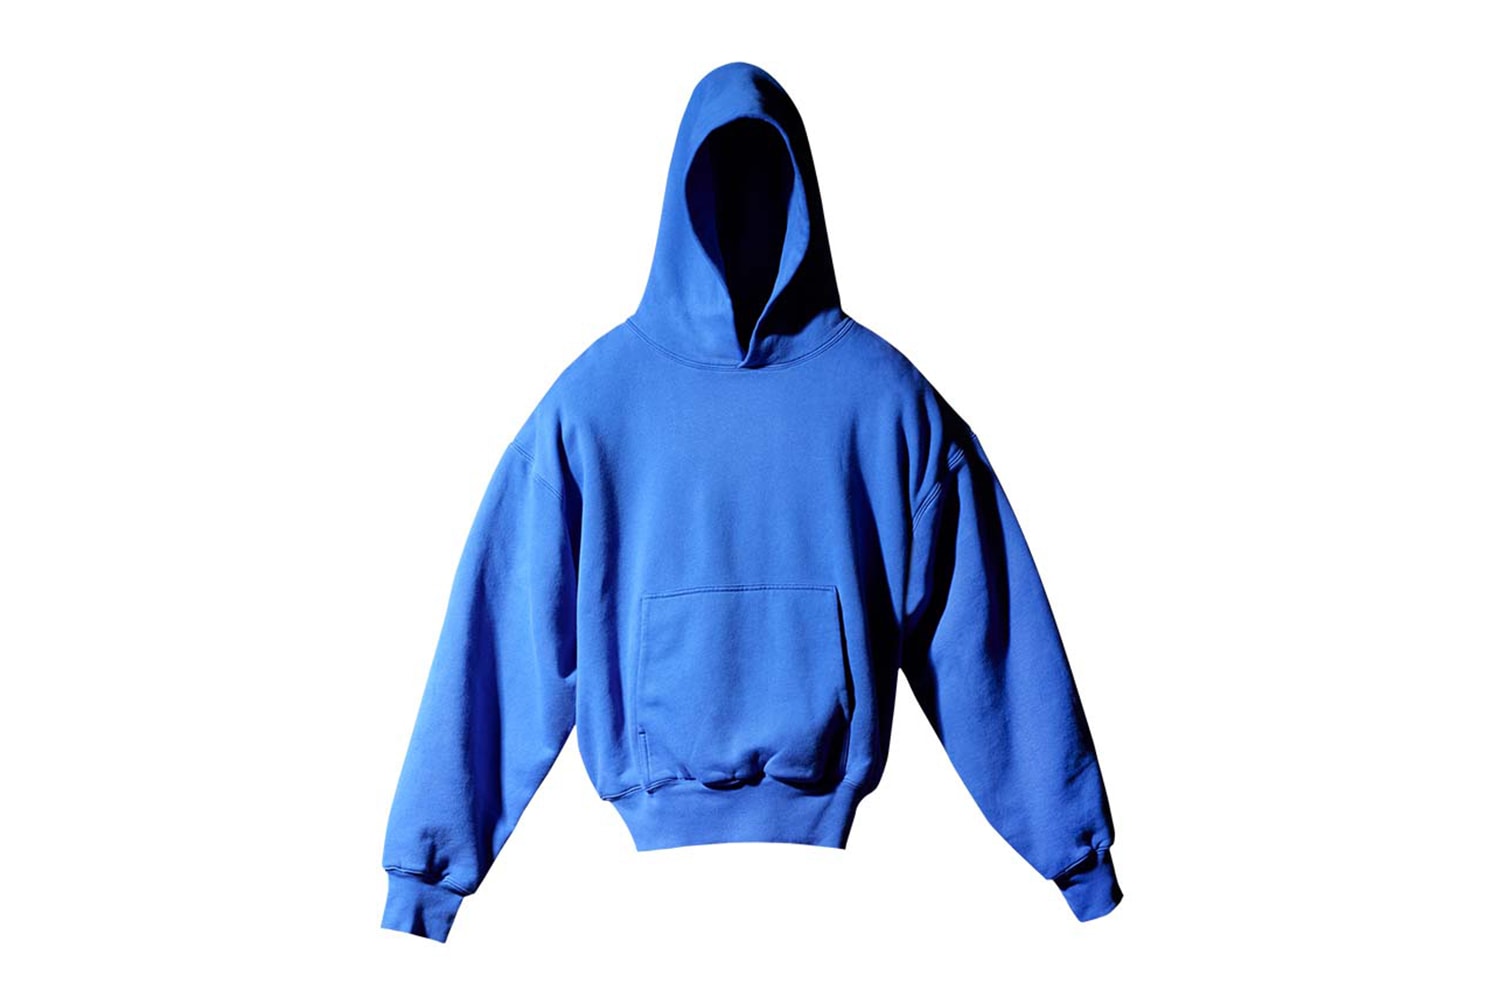 YEEZY GAP から2色の新作フーディがリリース Kanye West Heaven and Hell Music Video Debut YEEZY Gap TV Commercial Black Blue Hoodie Release Buy Price DONDA